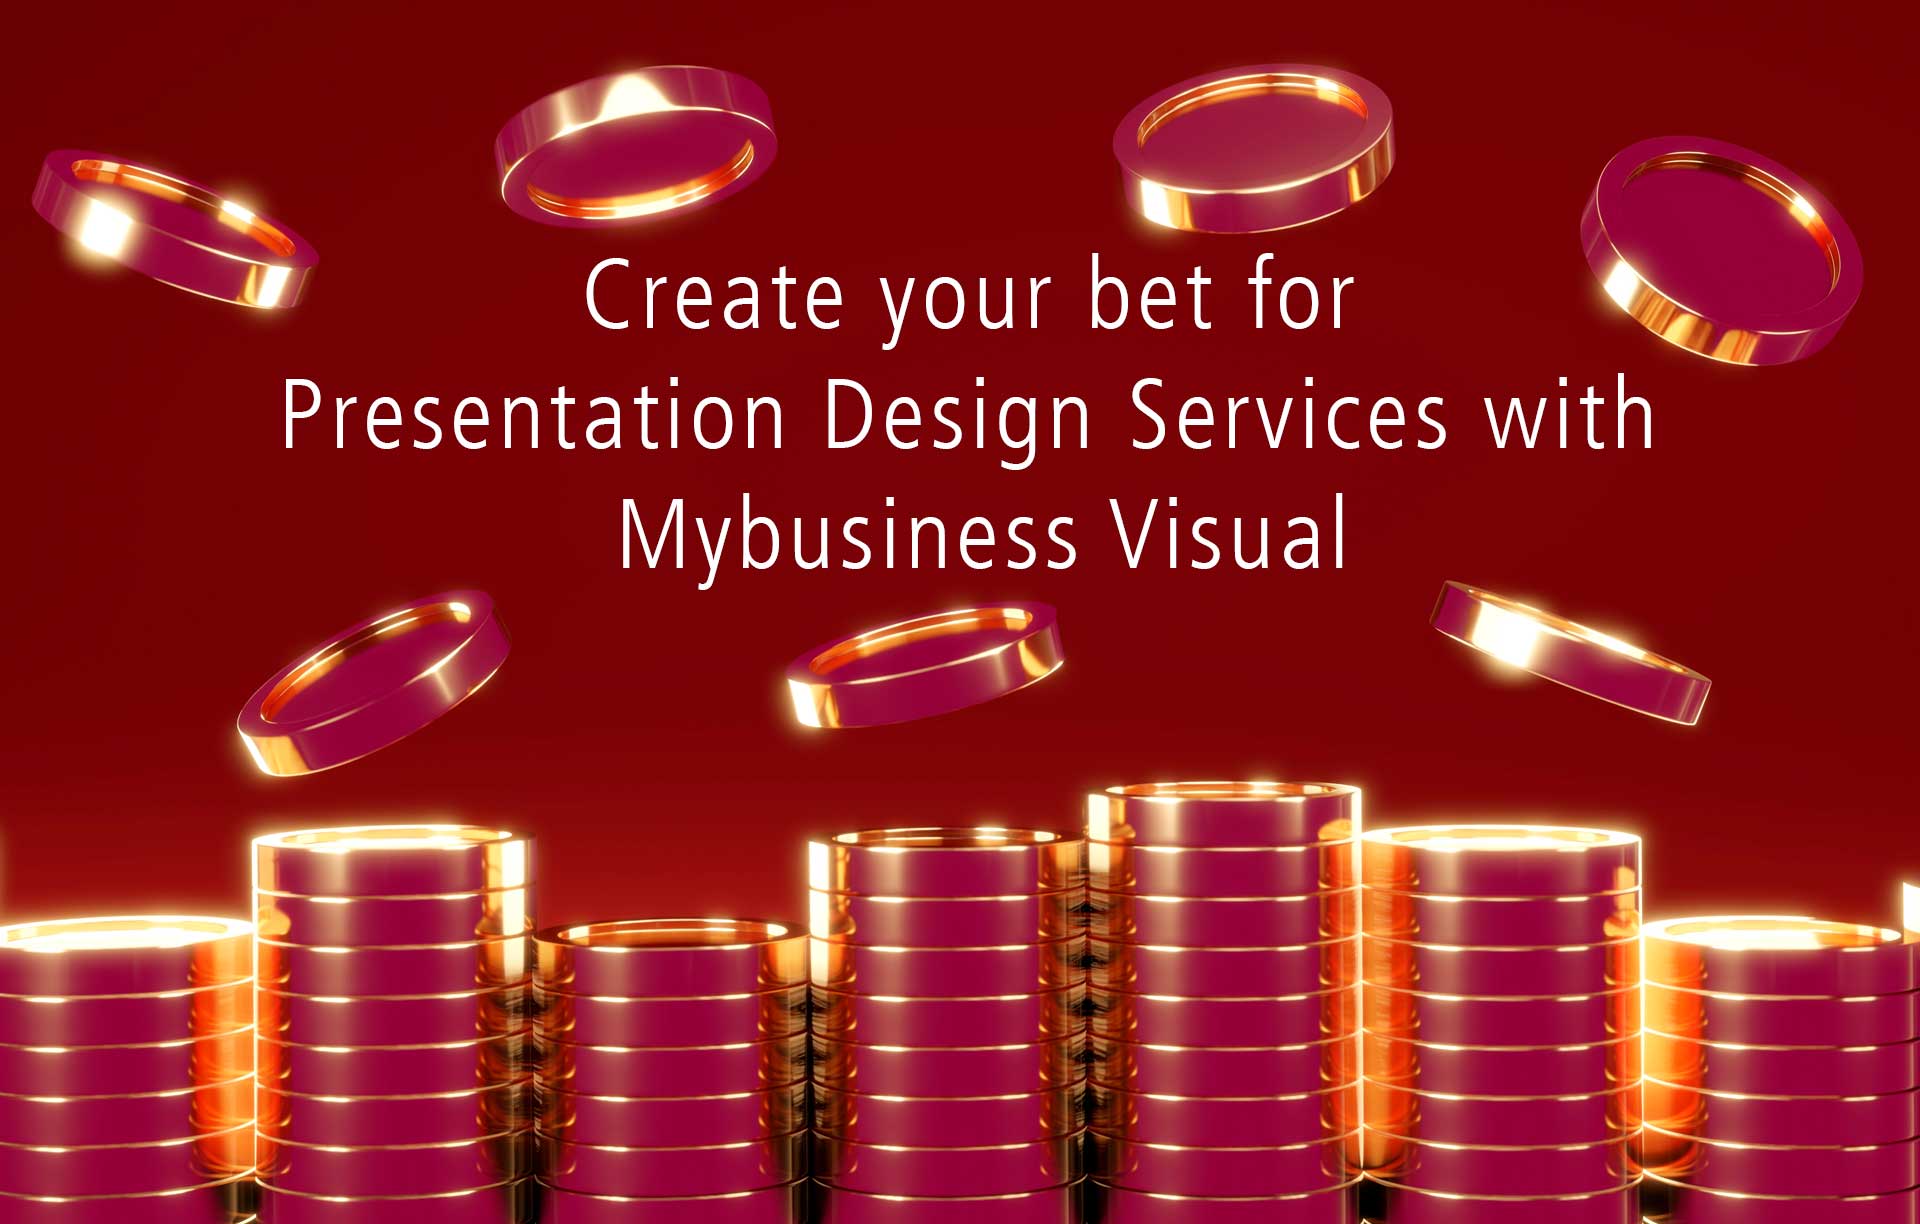 Create your bet for Presentation Design Services with Mybusiness Visual